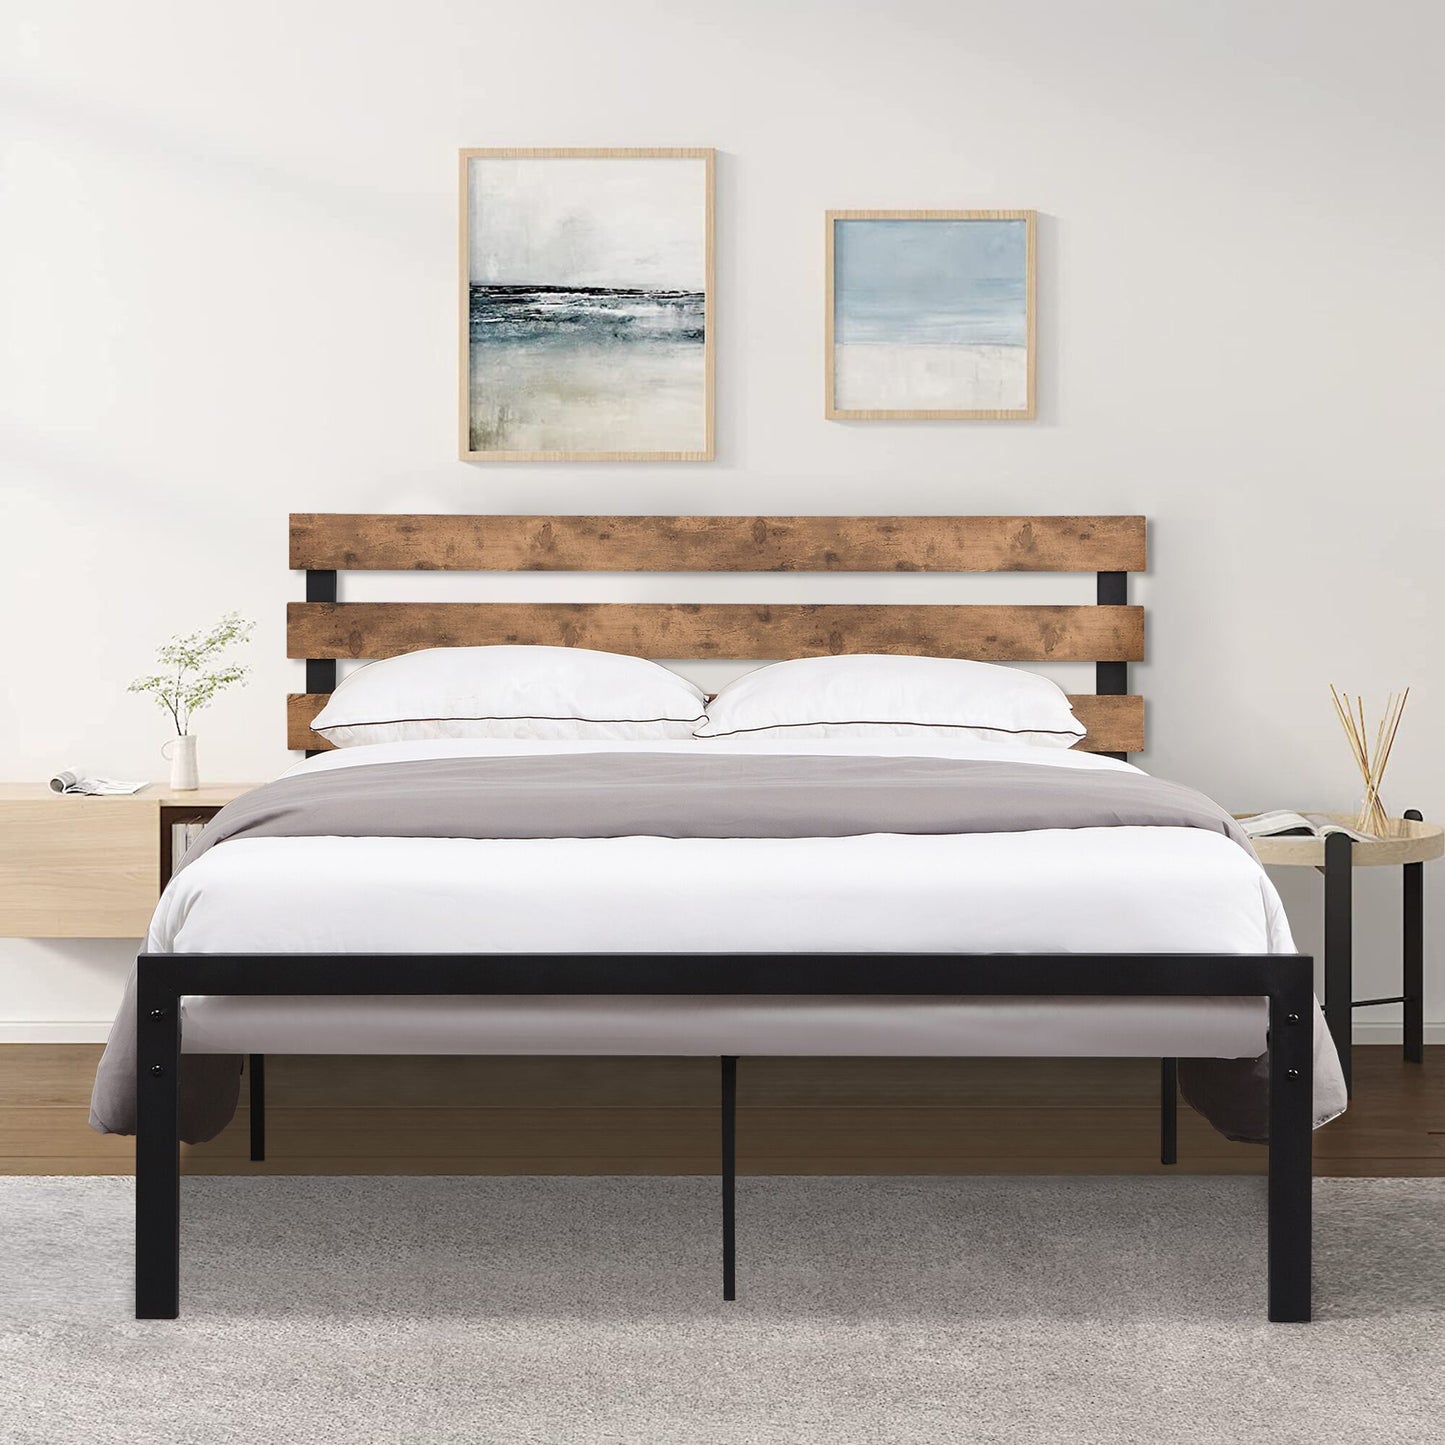 SYNGAR Black Metal Platform Bed Frame Full Size with Wooden Headboard, Steel Legs, Underbed Storage, Strong Slat Support, No Box Spring Needed, Rustic Full Bed Frame for Kids Teens Adults